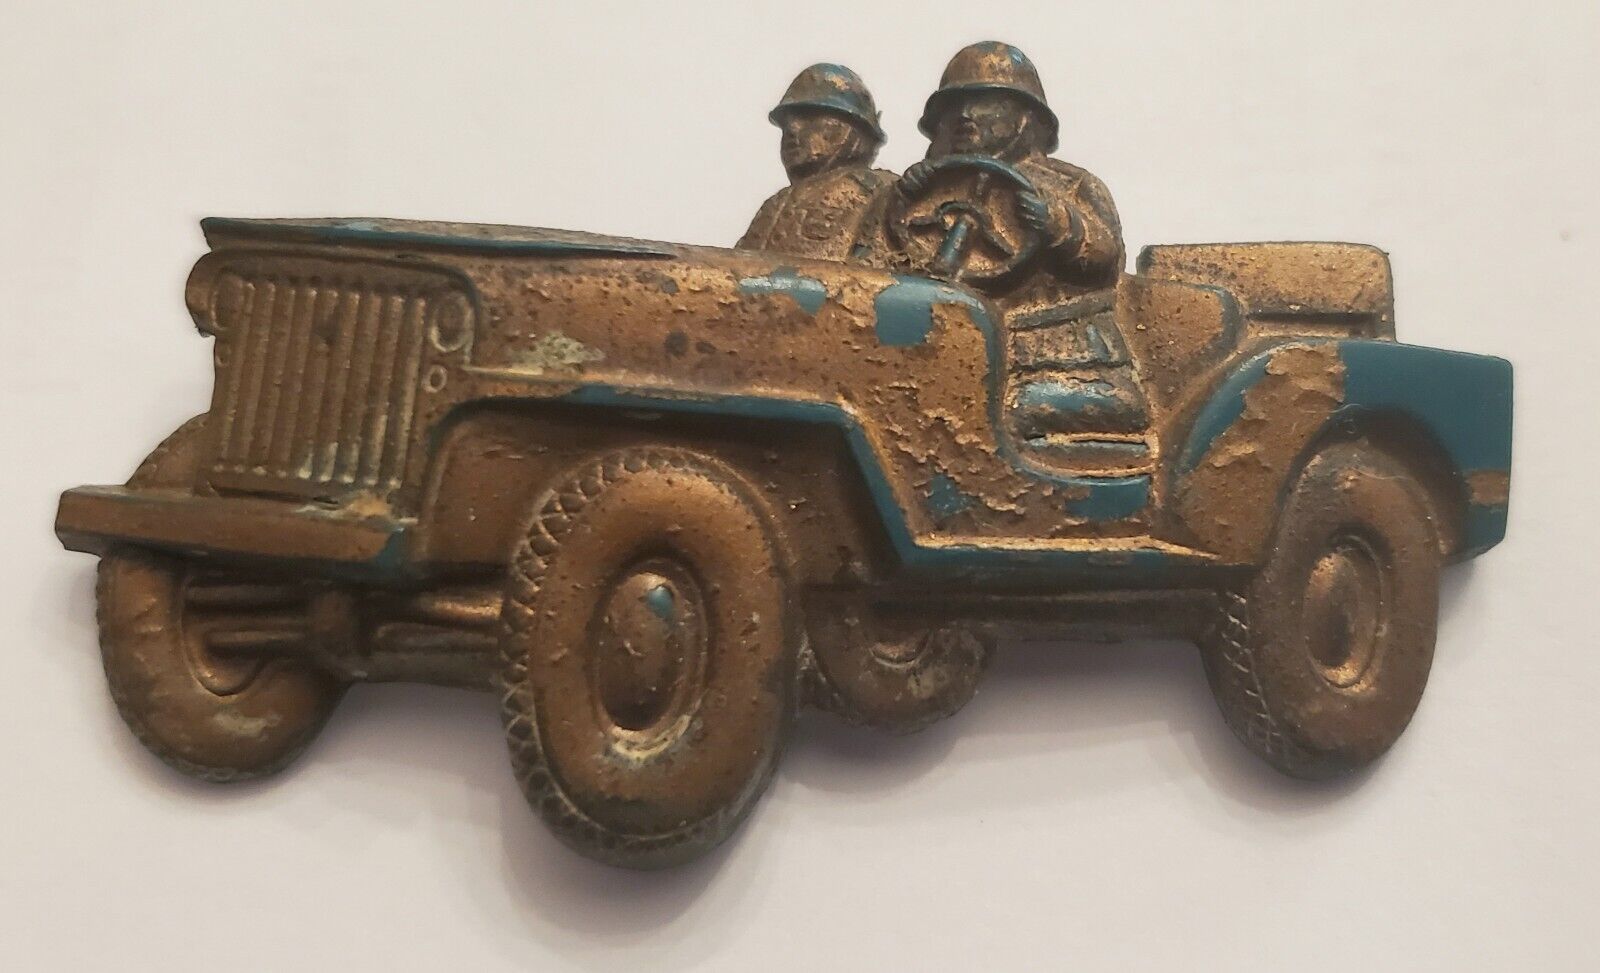 WW2 BAKELIT Jeep Sweetheart Brooch Pin Patriotic Home Front Collectible Army 